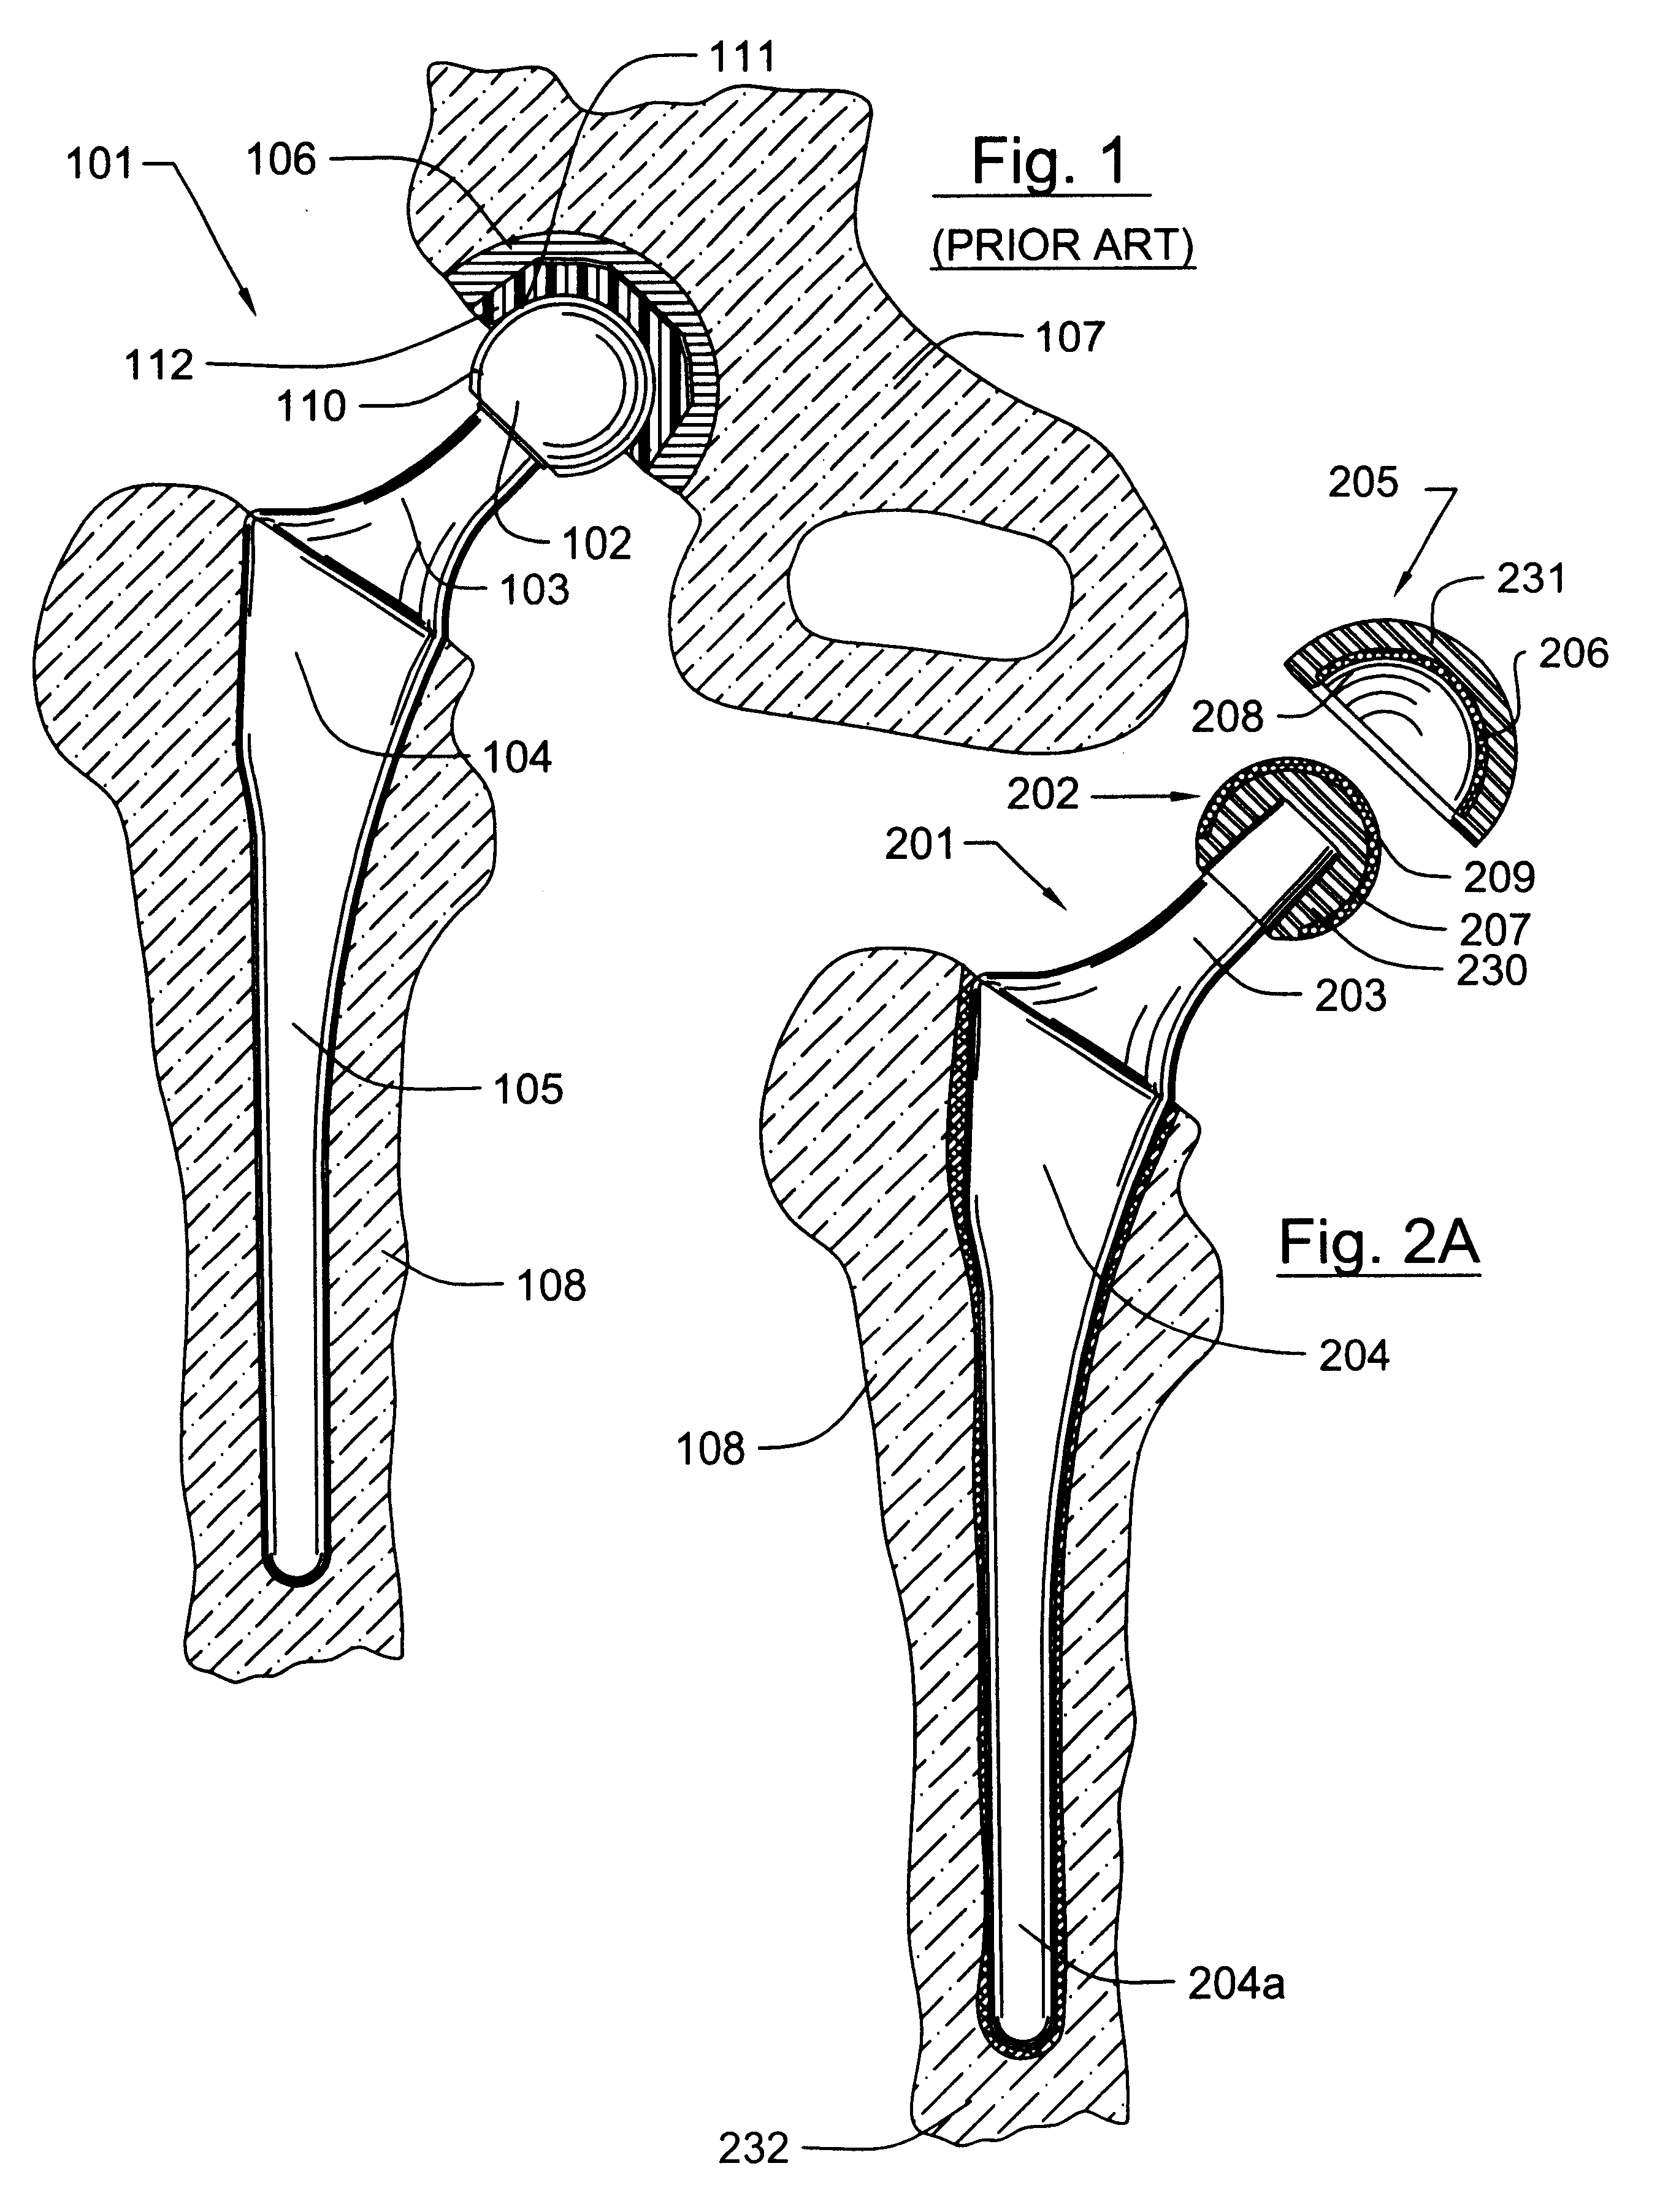 Methods for manufacturing a diamond prosthetic joint component